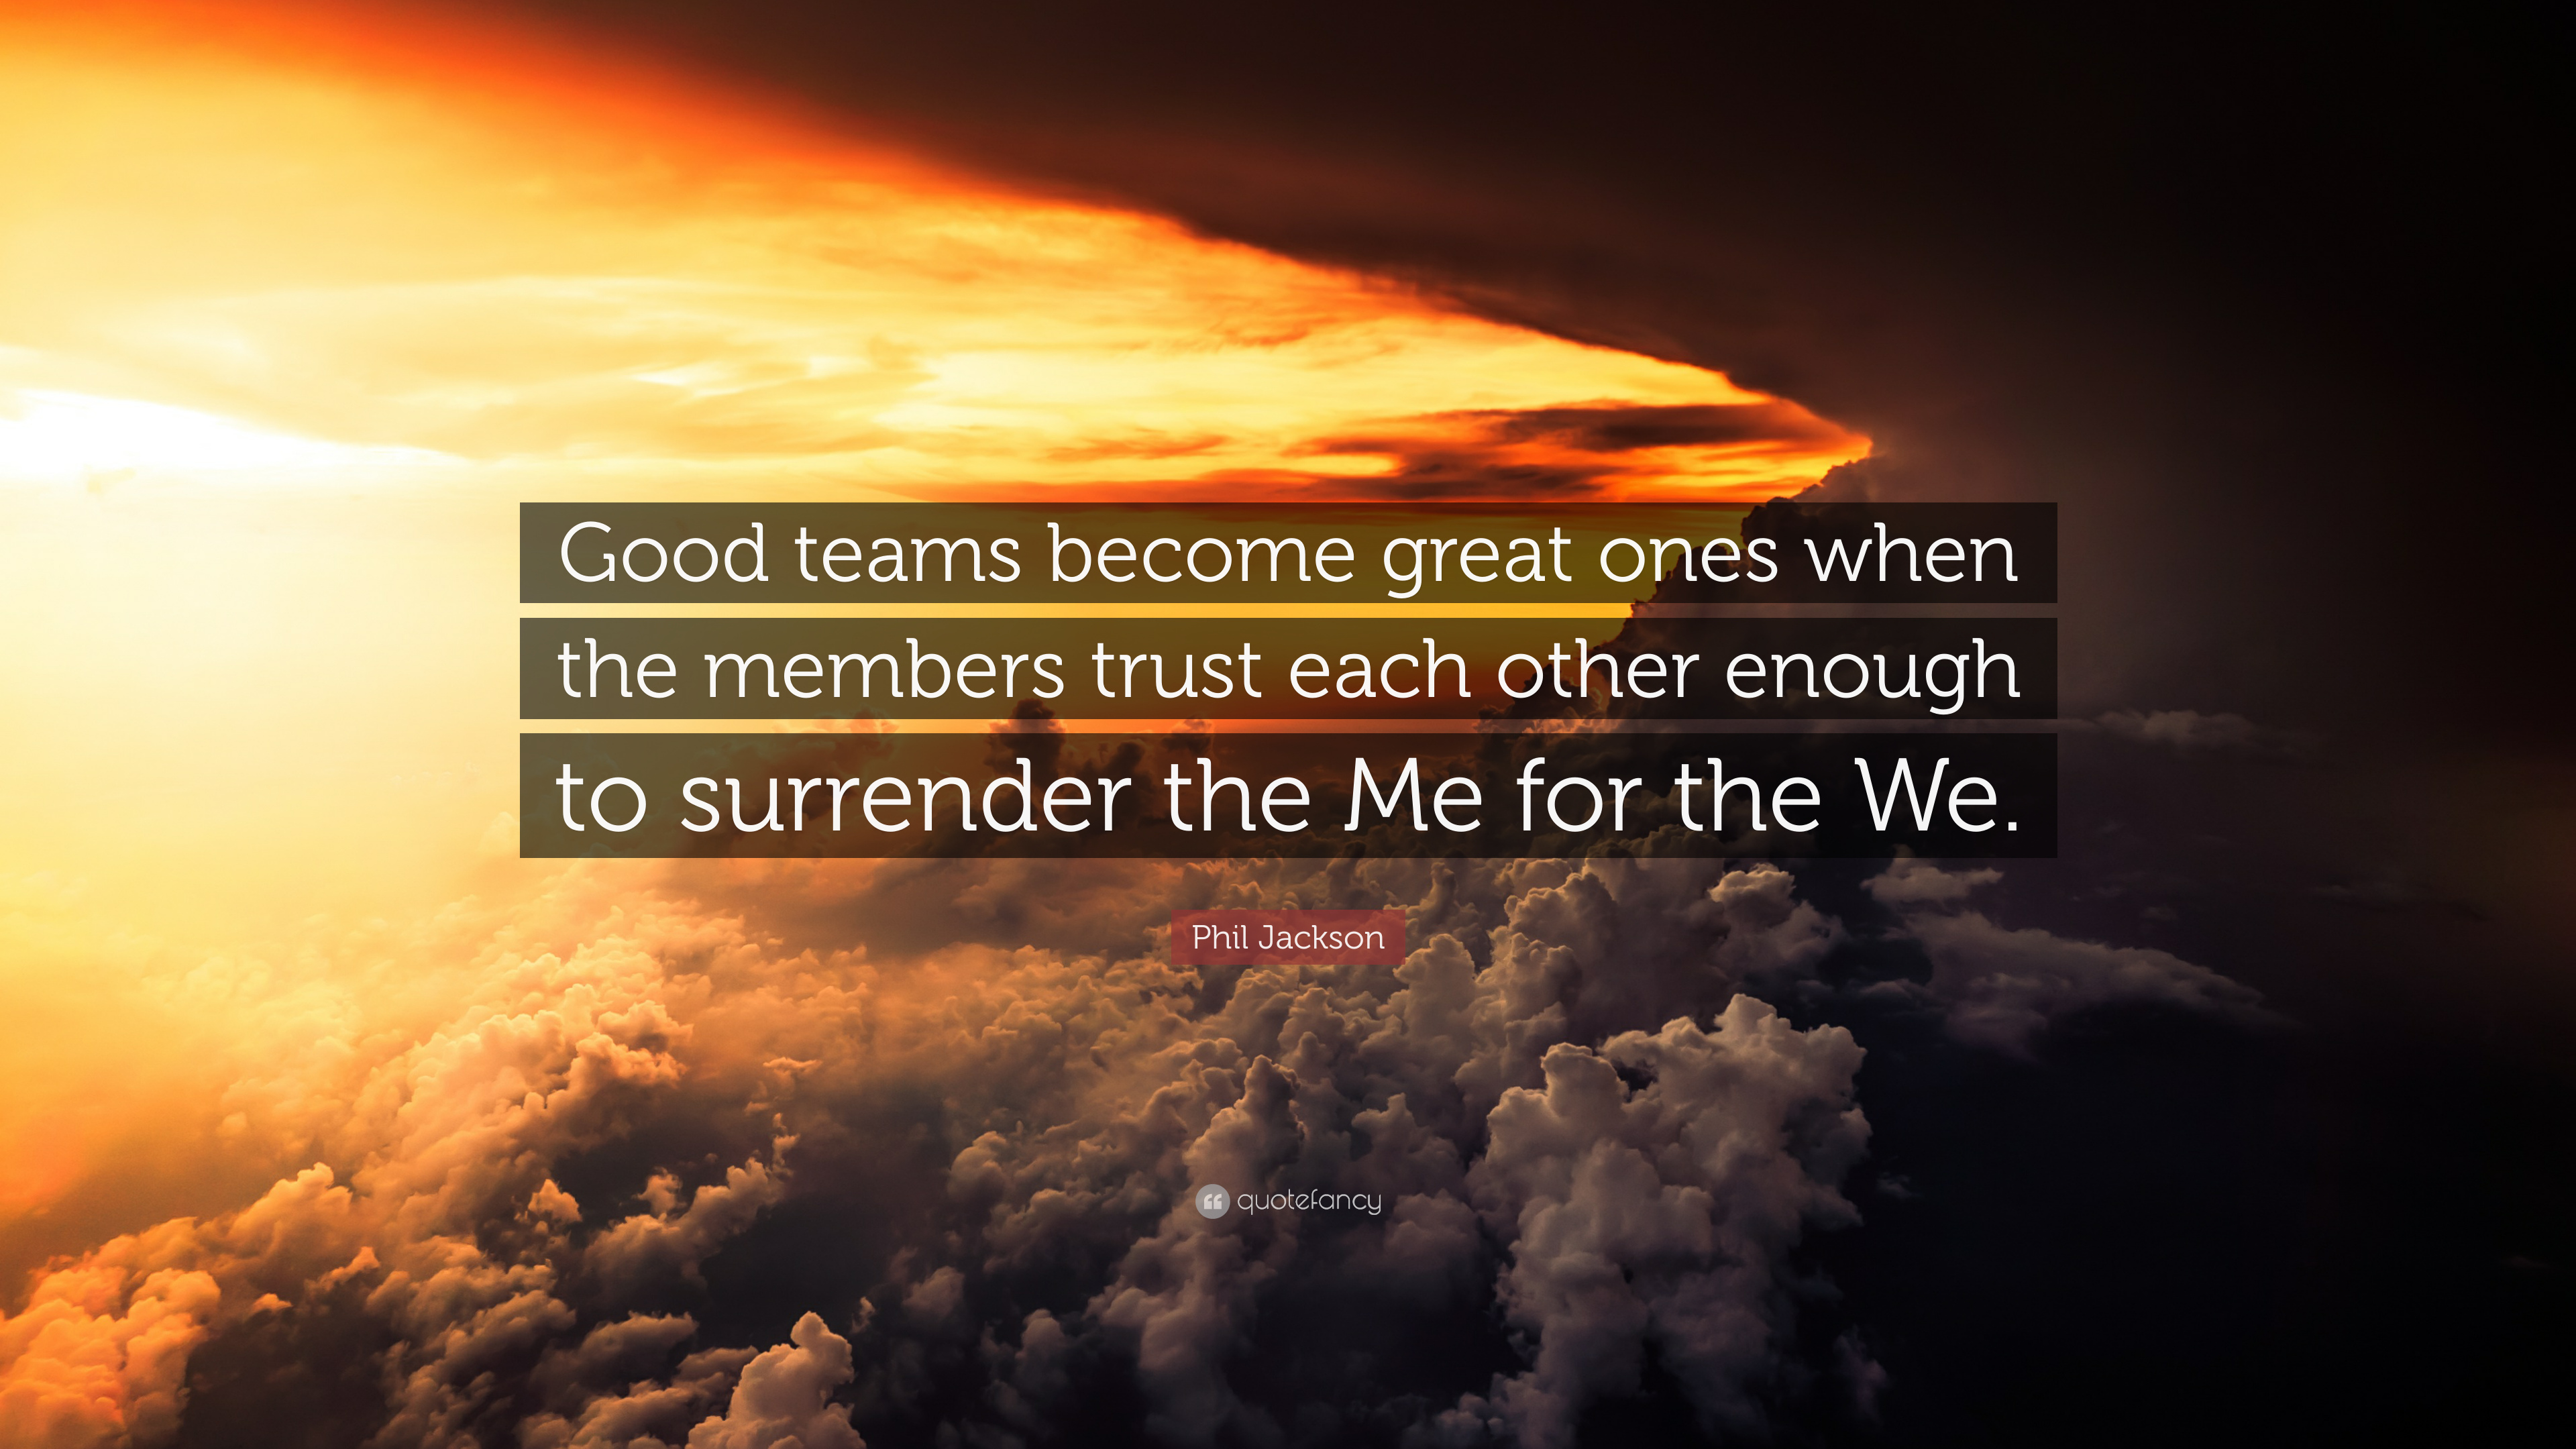 Phil Jackson Quote: “Good teams become great ones when the members trust each other enough to